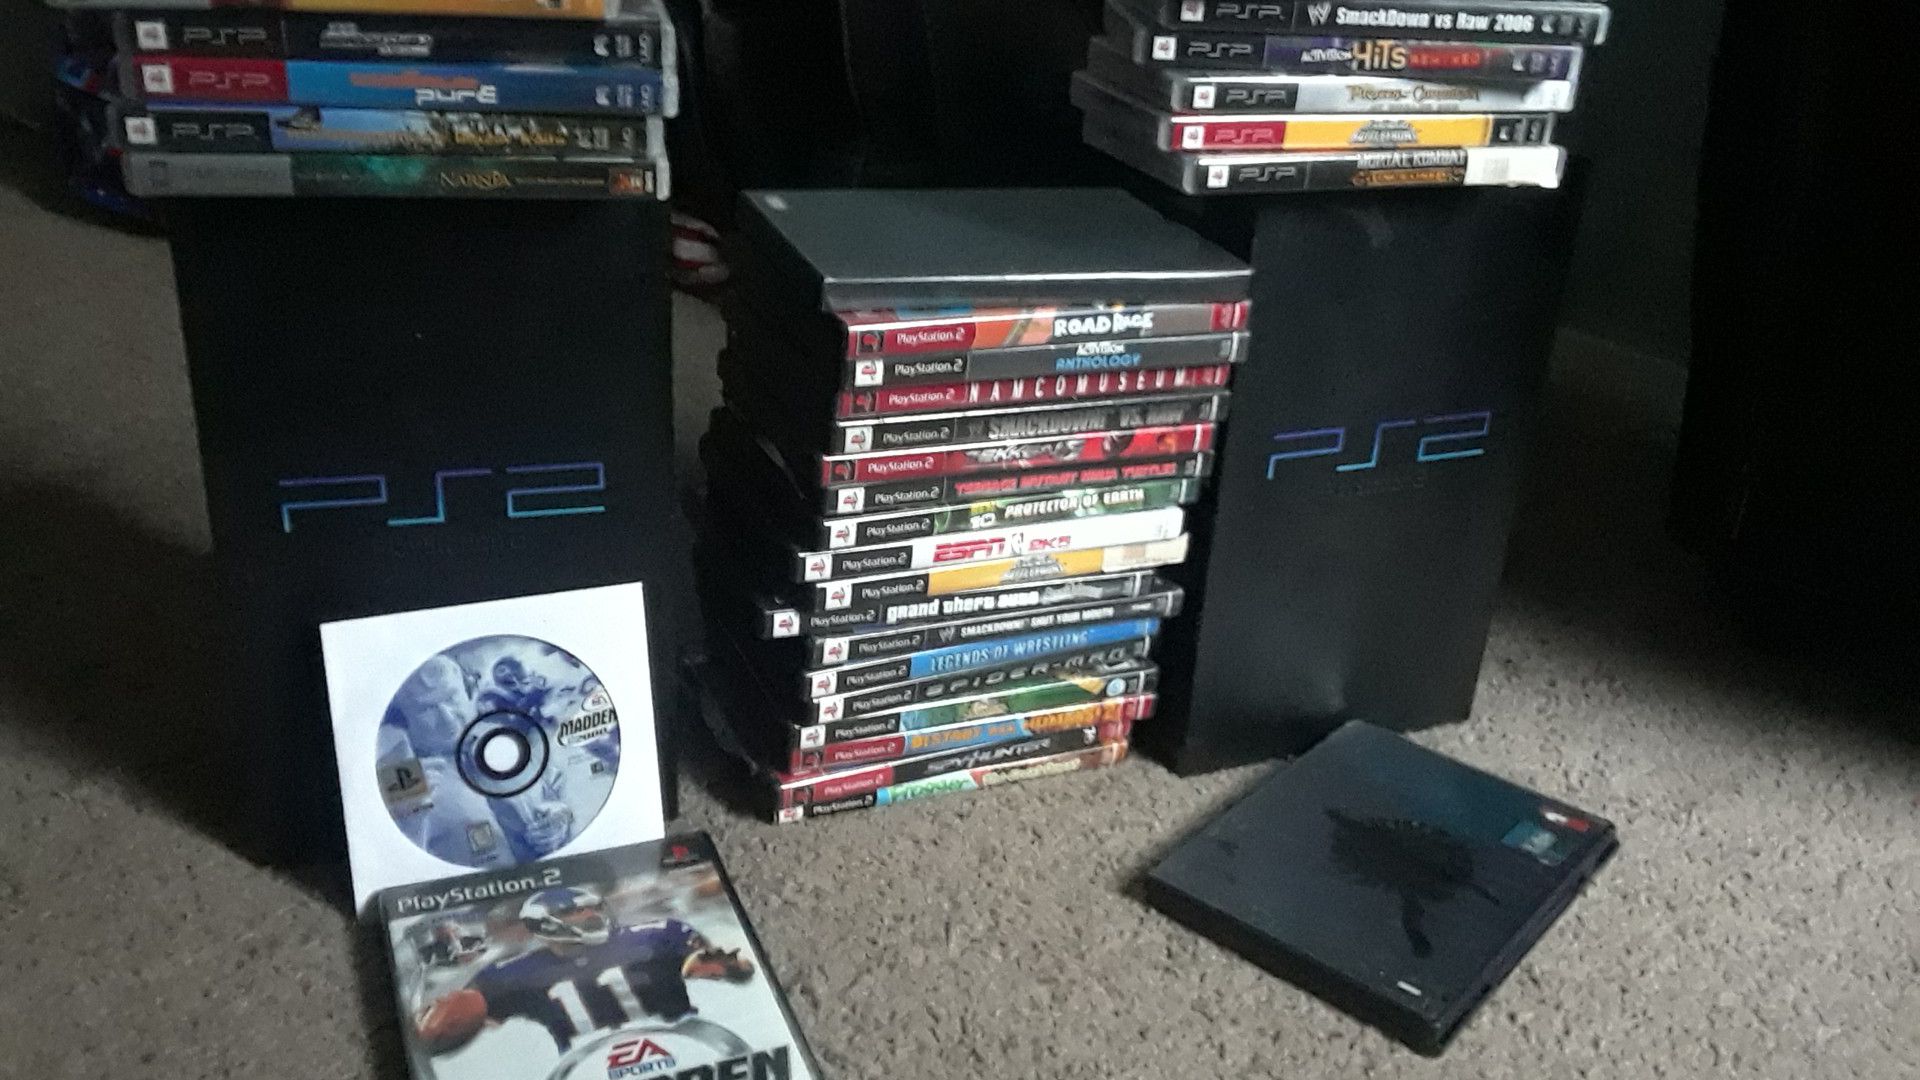 2 PlayStation 2's & Games